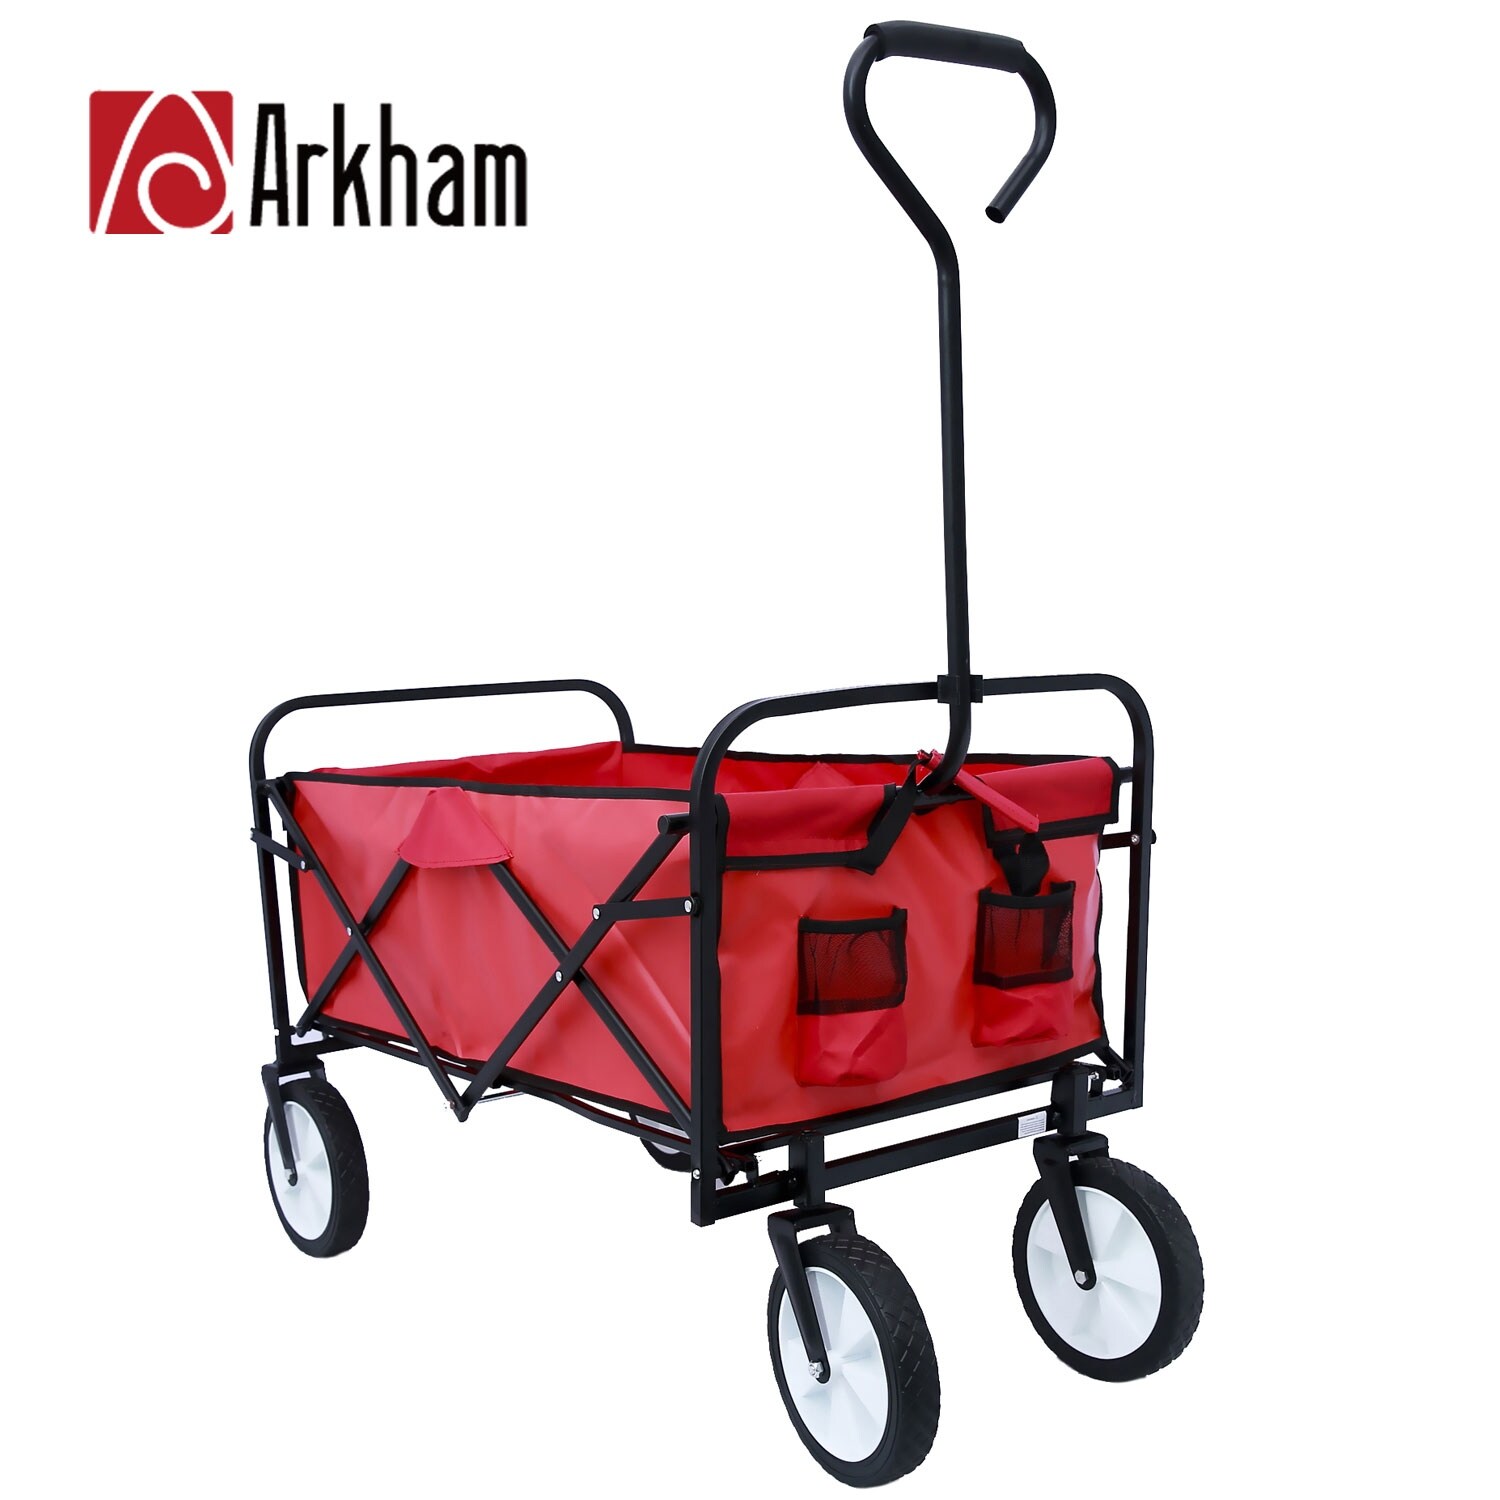 Details about   Collapsible Outdoor Utility Wagon Heavy Duty Portable Hand Cart W/ Drink Holder 